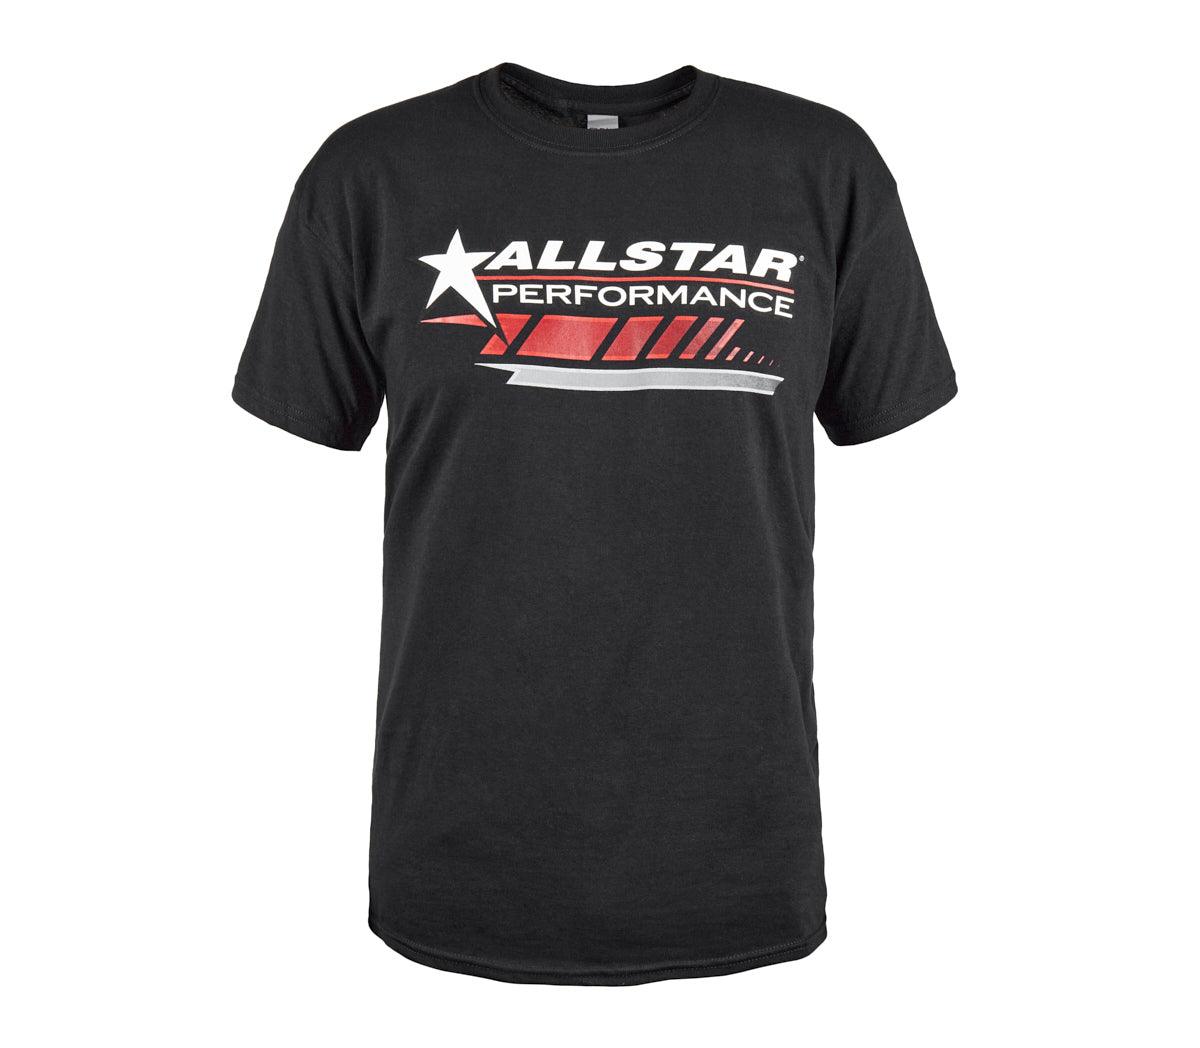 Allstar T-Shirt Black w/ Red Graphic XX-Large - Burlile Performance Products